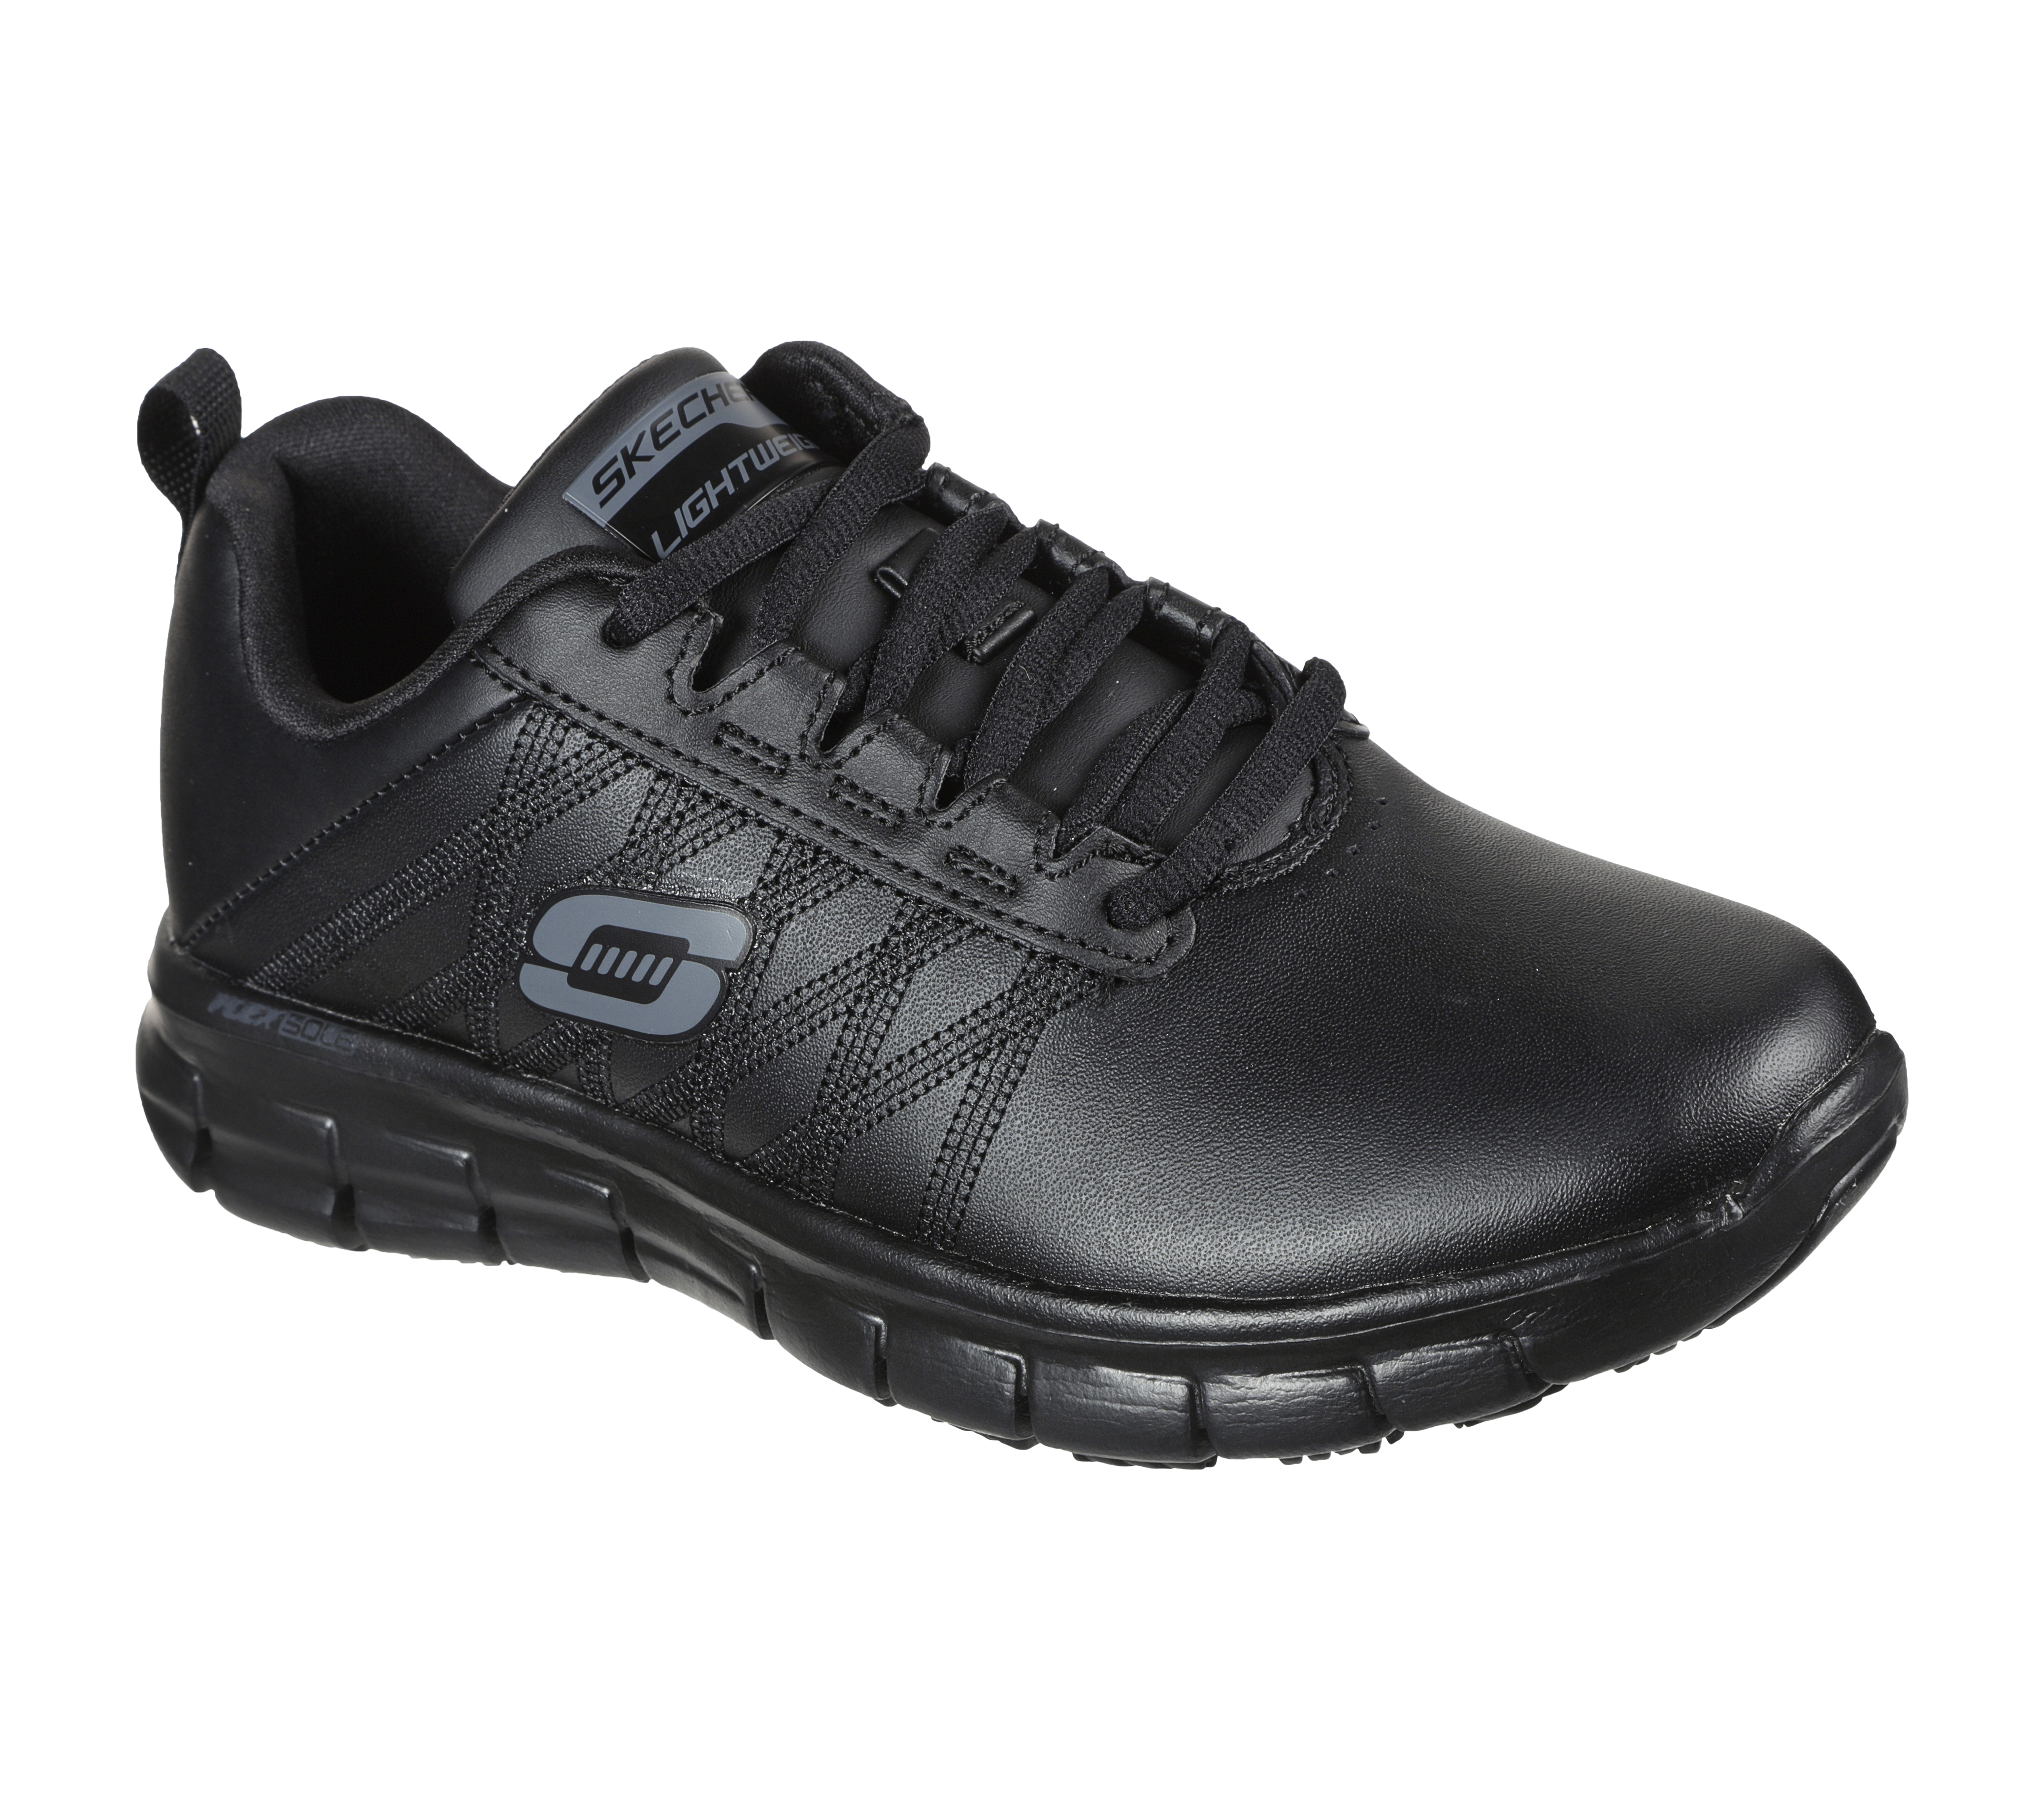 skechers women's sure track safety shoes